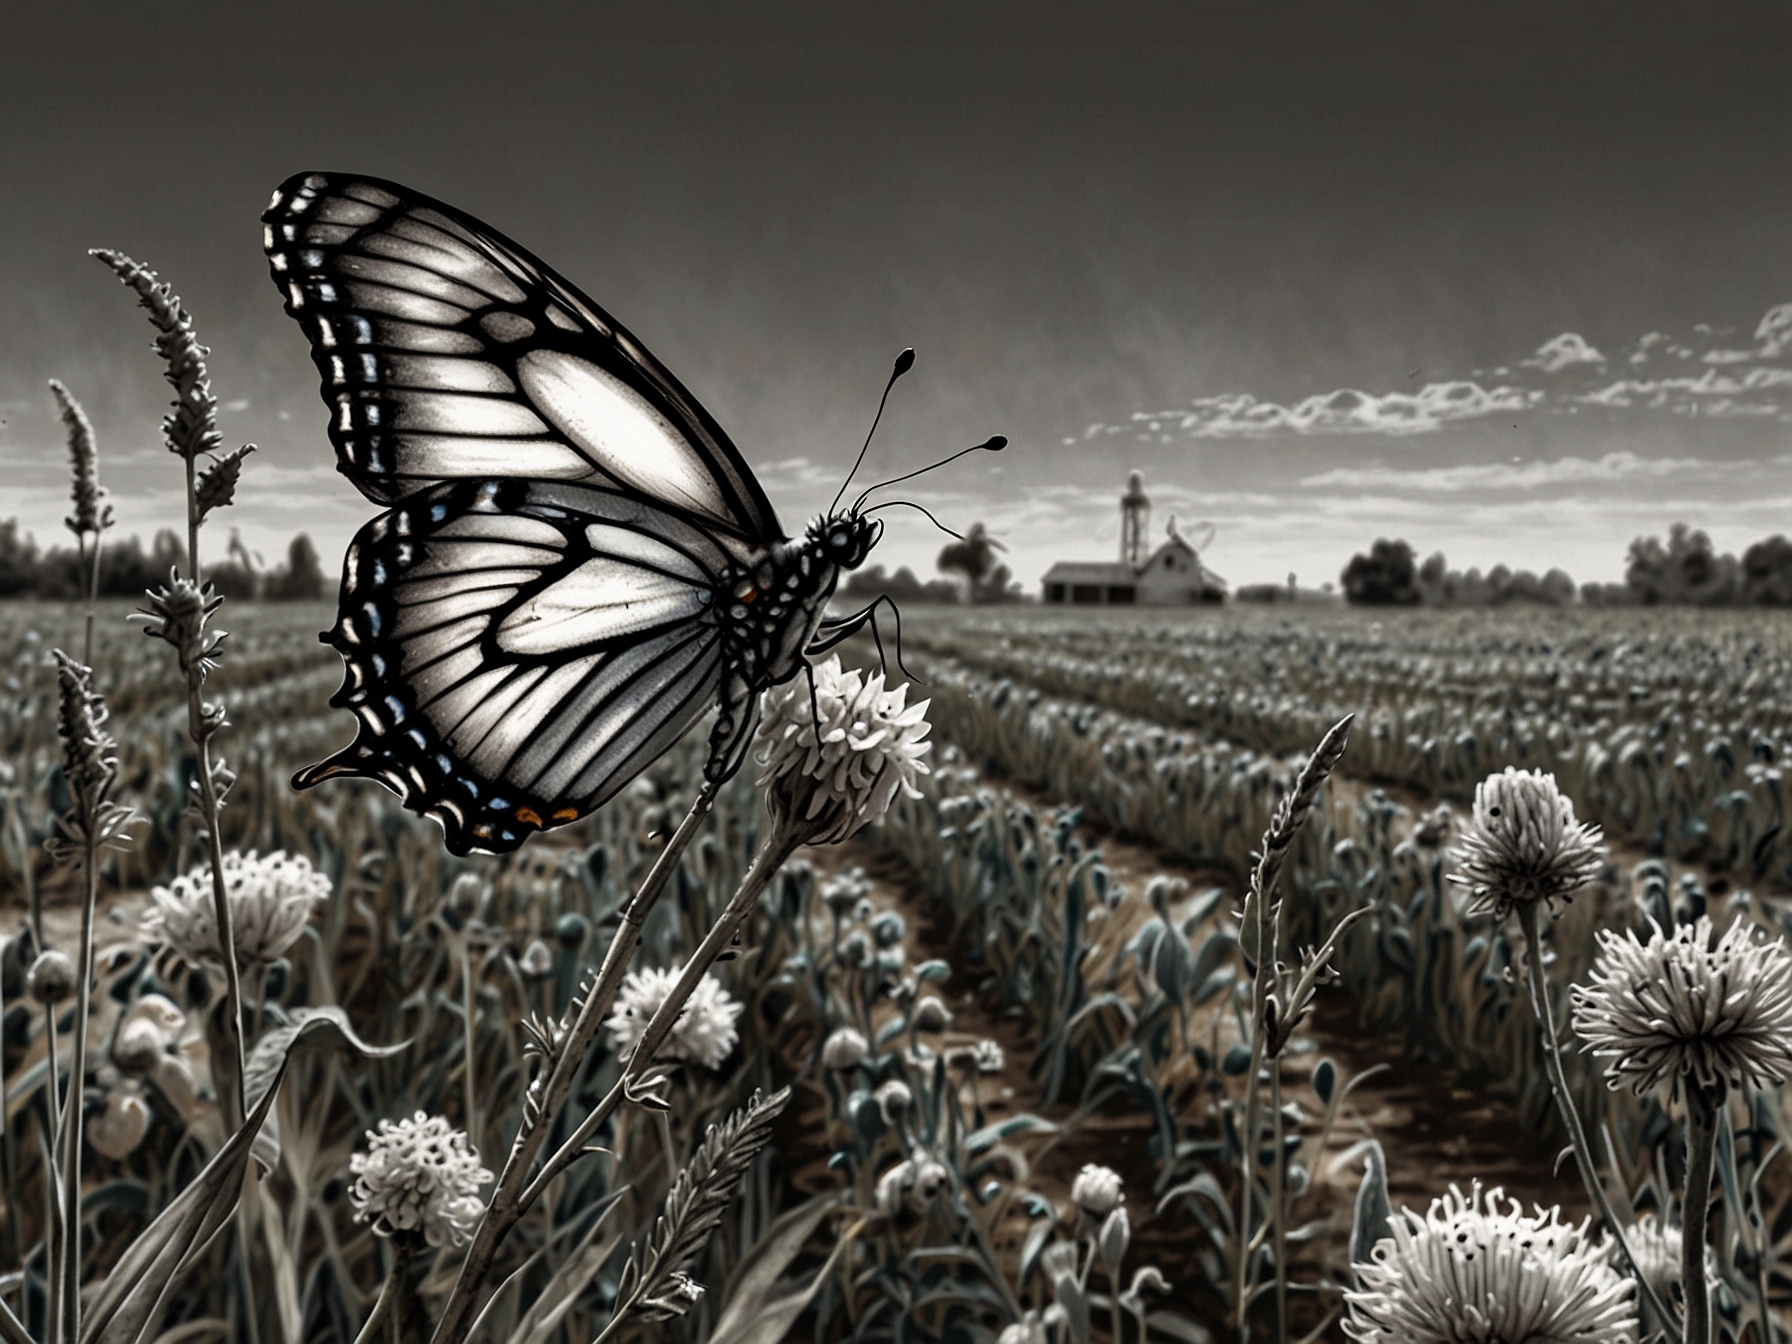 A butterfly struggles to forage in a pesticide-laden agricultural field, underscoring the detrimental effects of chemical use on butterfly health and survival.